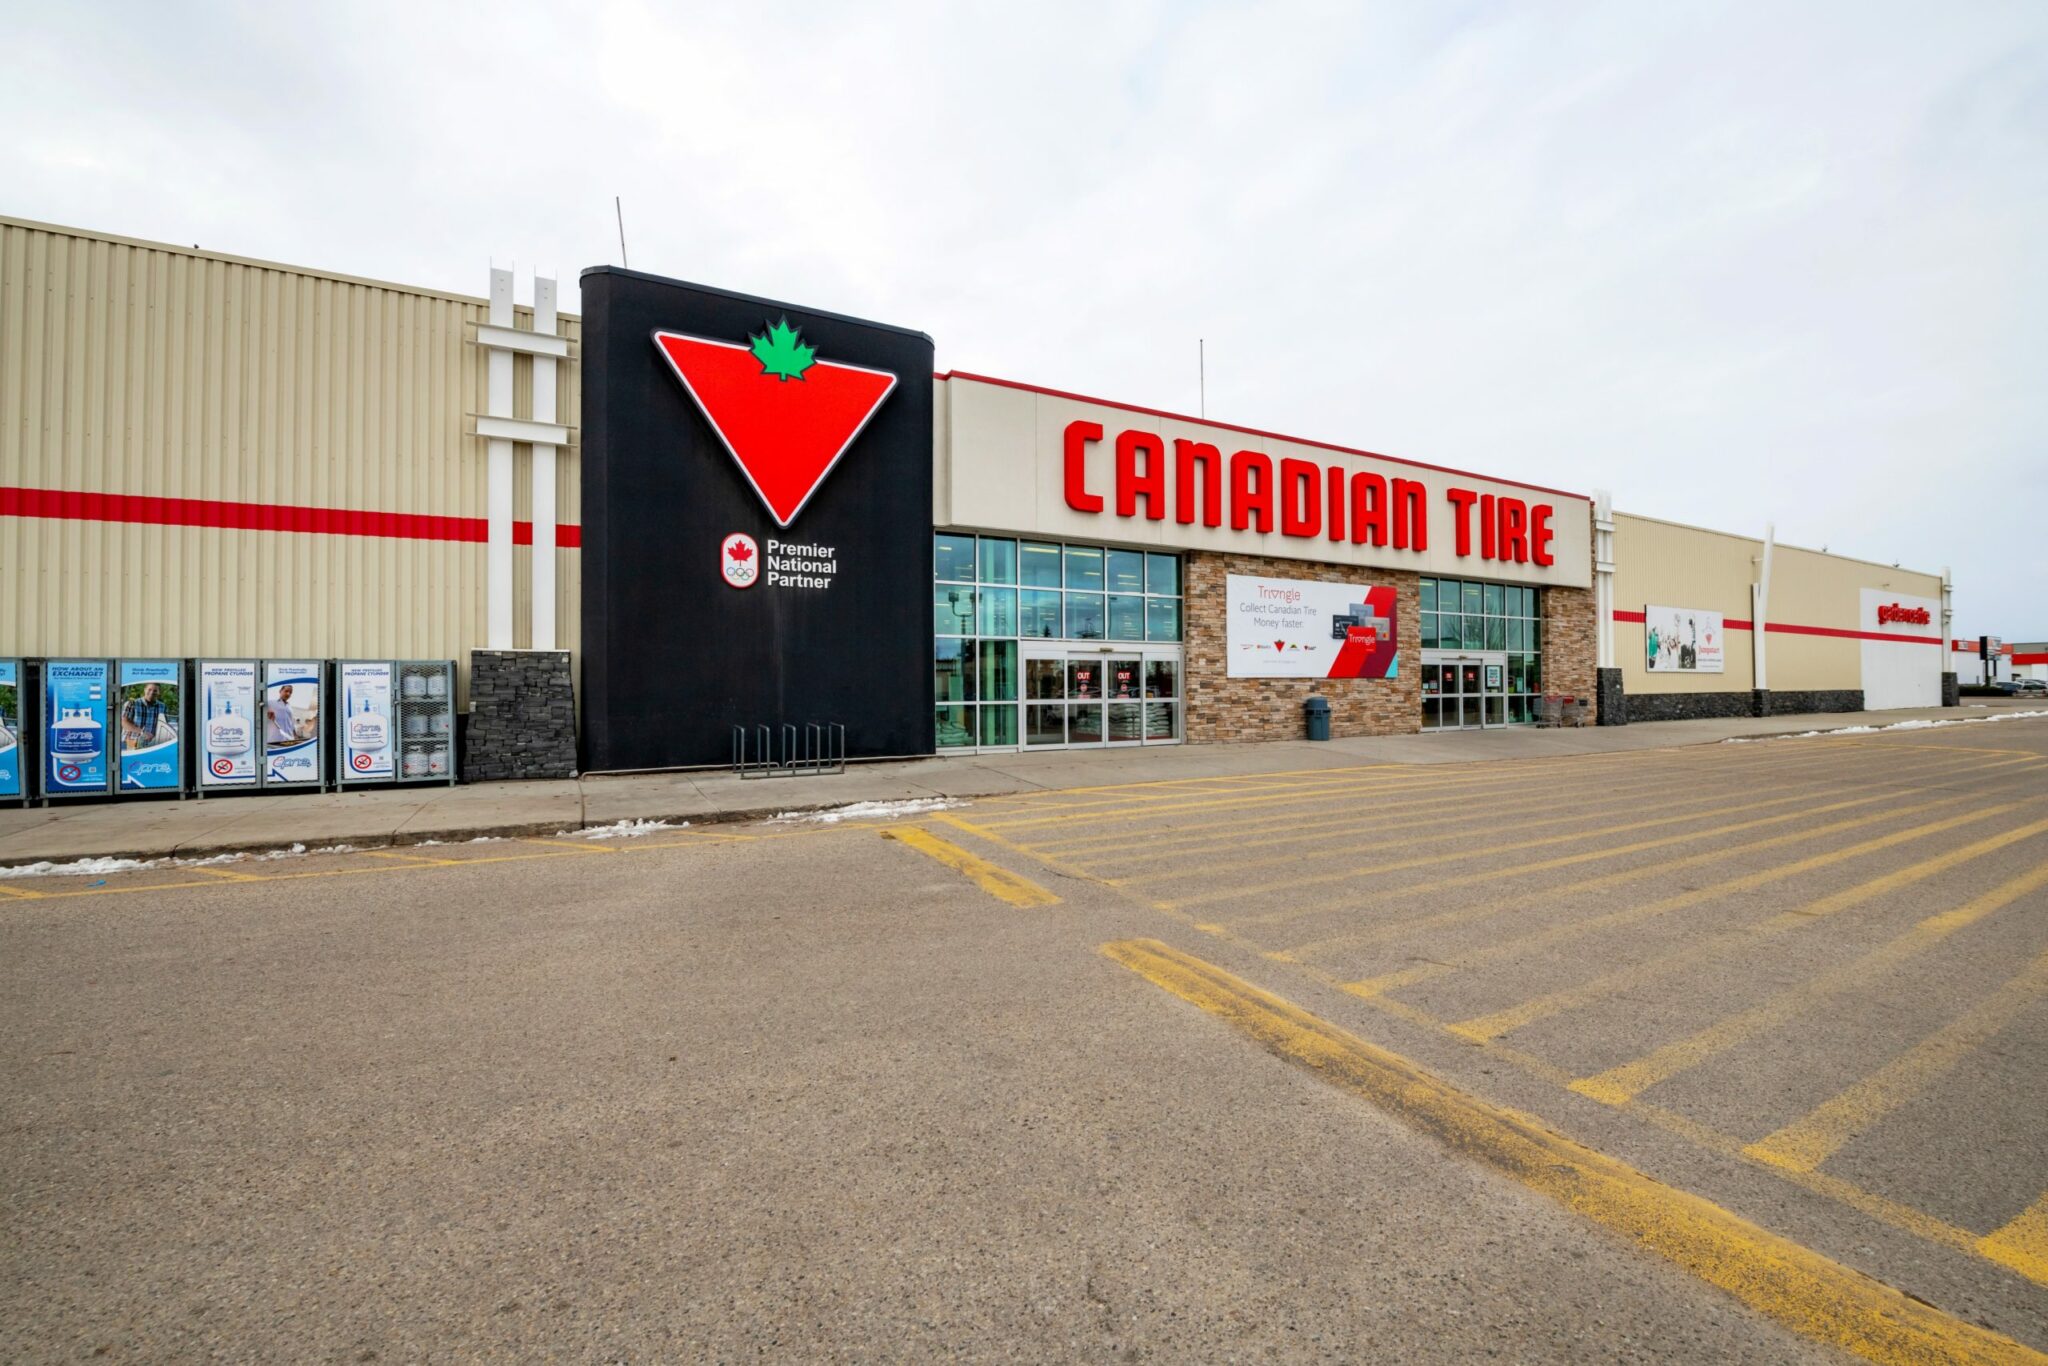 Skyline Retail REIT Acquires Multi-Tenant Plaza in Red Deer, AB